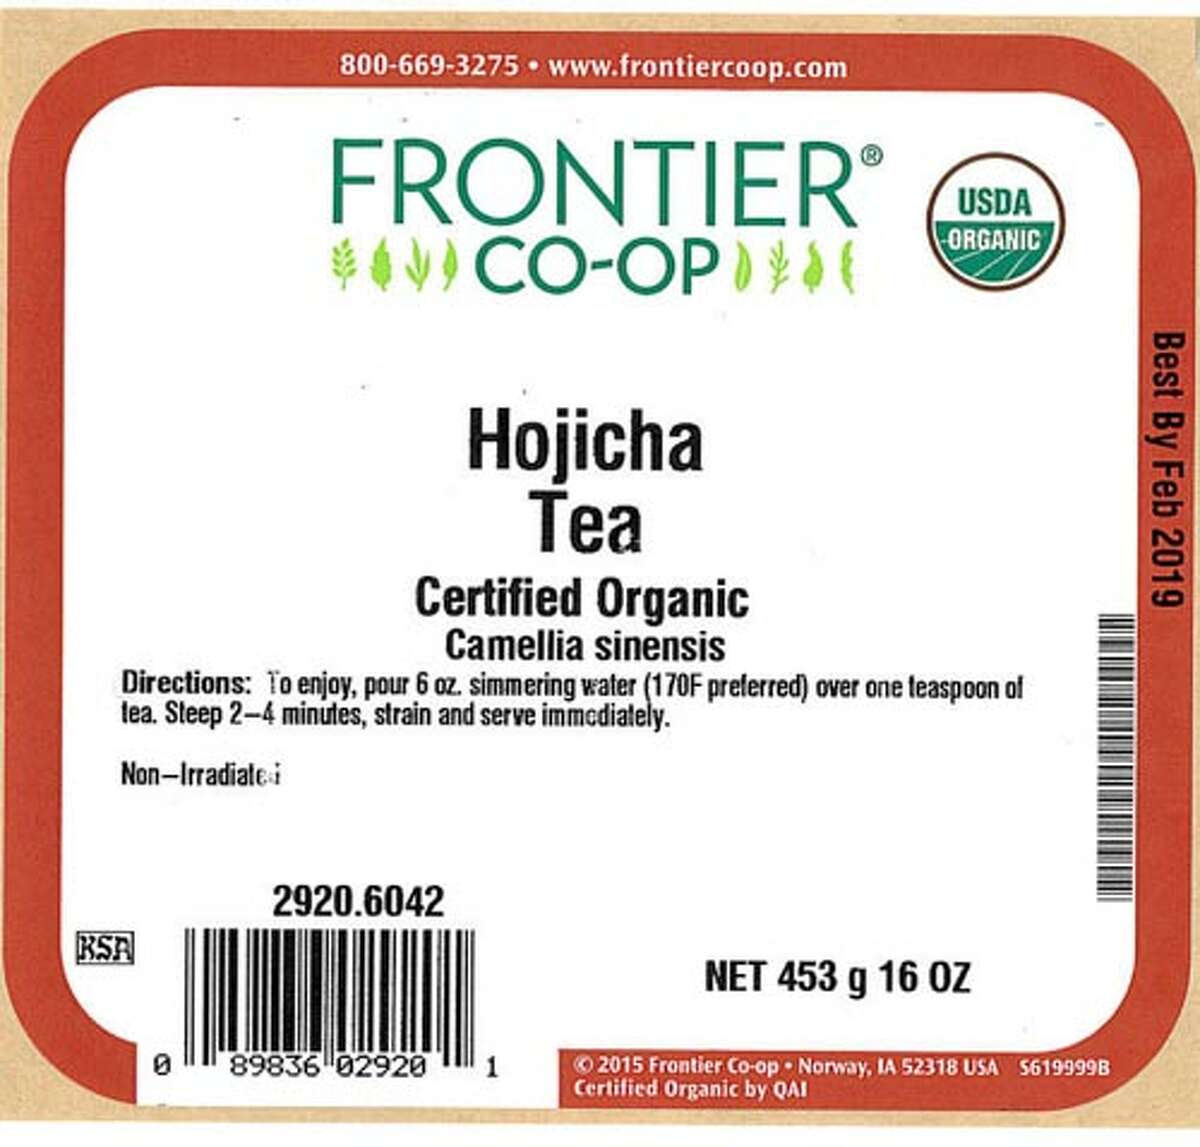 Frontier Co-op is voluntarily recalling its Organic Hojicha Tea due to potential to be contaminated with Salmonella, an organism which can cause serious and sometimes fatal infections in young children, frail or elderly people, and others with weakened immune systems. For a full list of products, click here.